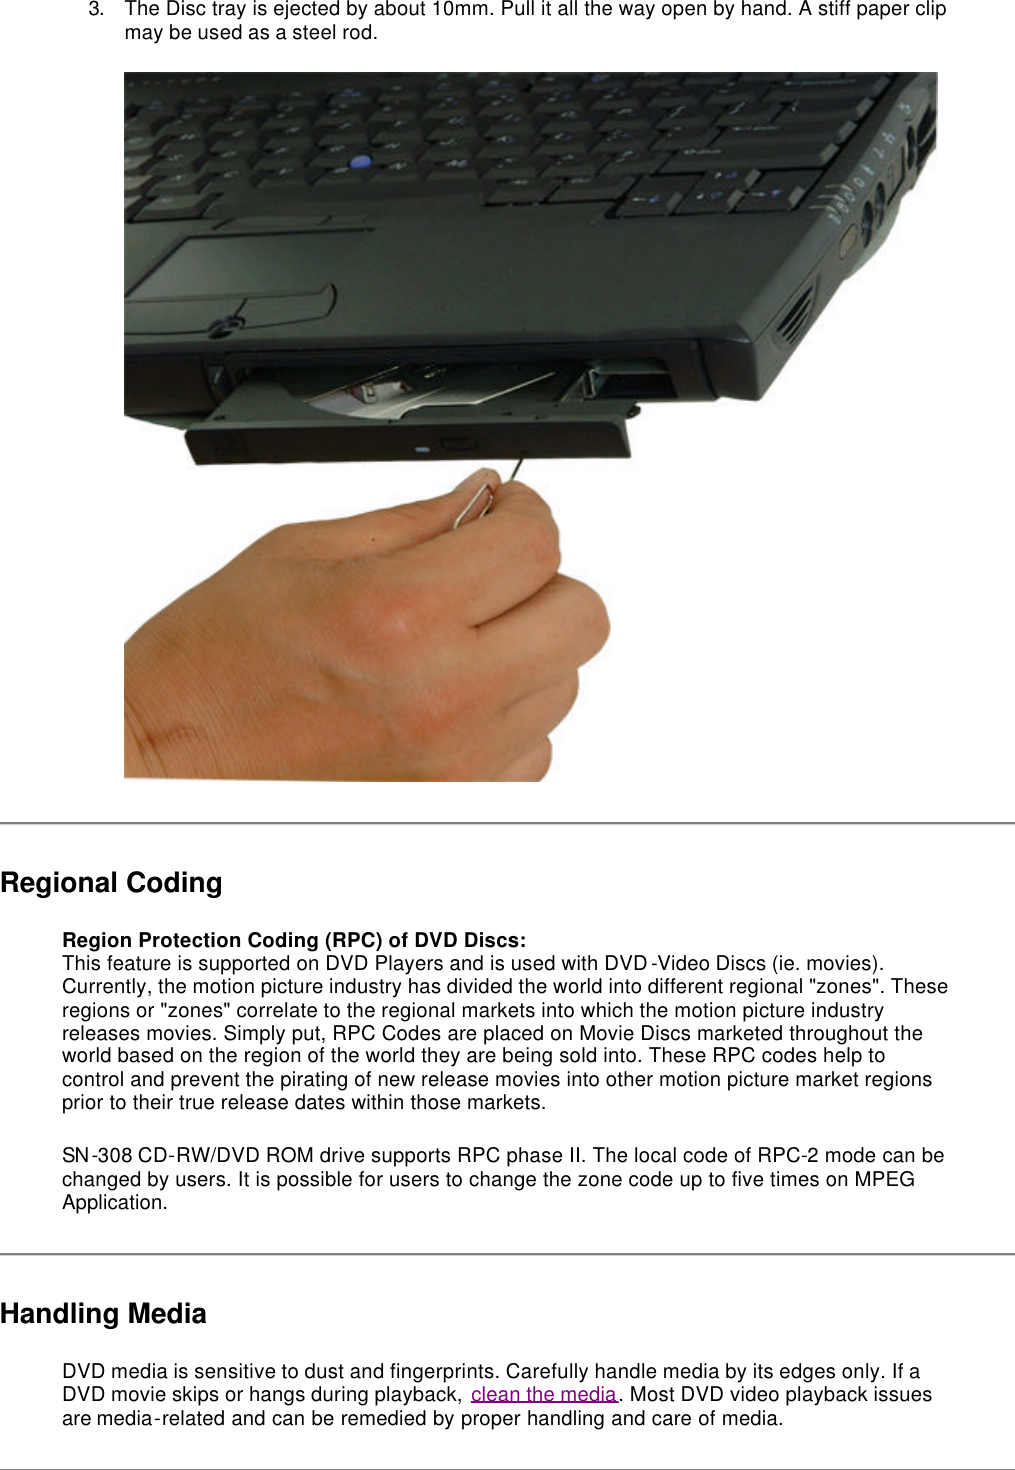 3. The Disc tray is ejected by about 10mm. Pull it all the way open by hand. A stiff paper clip may be used as a steel rod.  Regional Coding Region Protection Coding (RPC) of DVD Discs:  This feature is supported on DVD Players and is used with DVD-Video Discs (ie. movies). Currently, the motion picture industry has divided the world into different regional &quot;zones&quot;. These regions or &quot;zones&quot; correlate to the regional markets into which the motion picture industry releases movies. Simply put, RPC Codes are placed on Movie Discs marketed throughout the world based on the region of the world they are being sold into. These RPC codes help to control and prevent the pirating of new release movies into other motion picture market regions prior to their true release dates within those markets.  SN-308 CD-RW/DVD ROM drive supports RPC phase II. The local code of RPC-2 mode can be changed by users. It is possible for users to change the zone code up to five times on MPEG Application.  Handling Media DVD media is sensitive to dust and fingerprints. Carefully handle media by its edges only. If a DVD movie skips or hangs during playback, clean the media. Most DVD video playback issues are media-related and can be remedied by proper handling and care of media.  